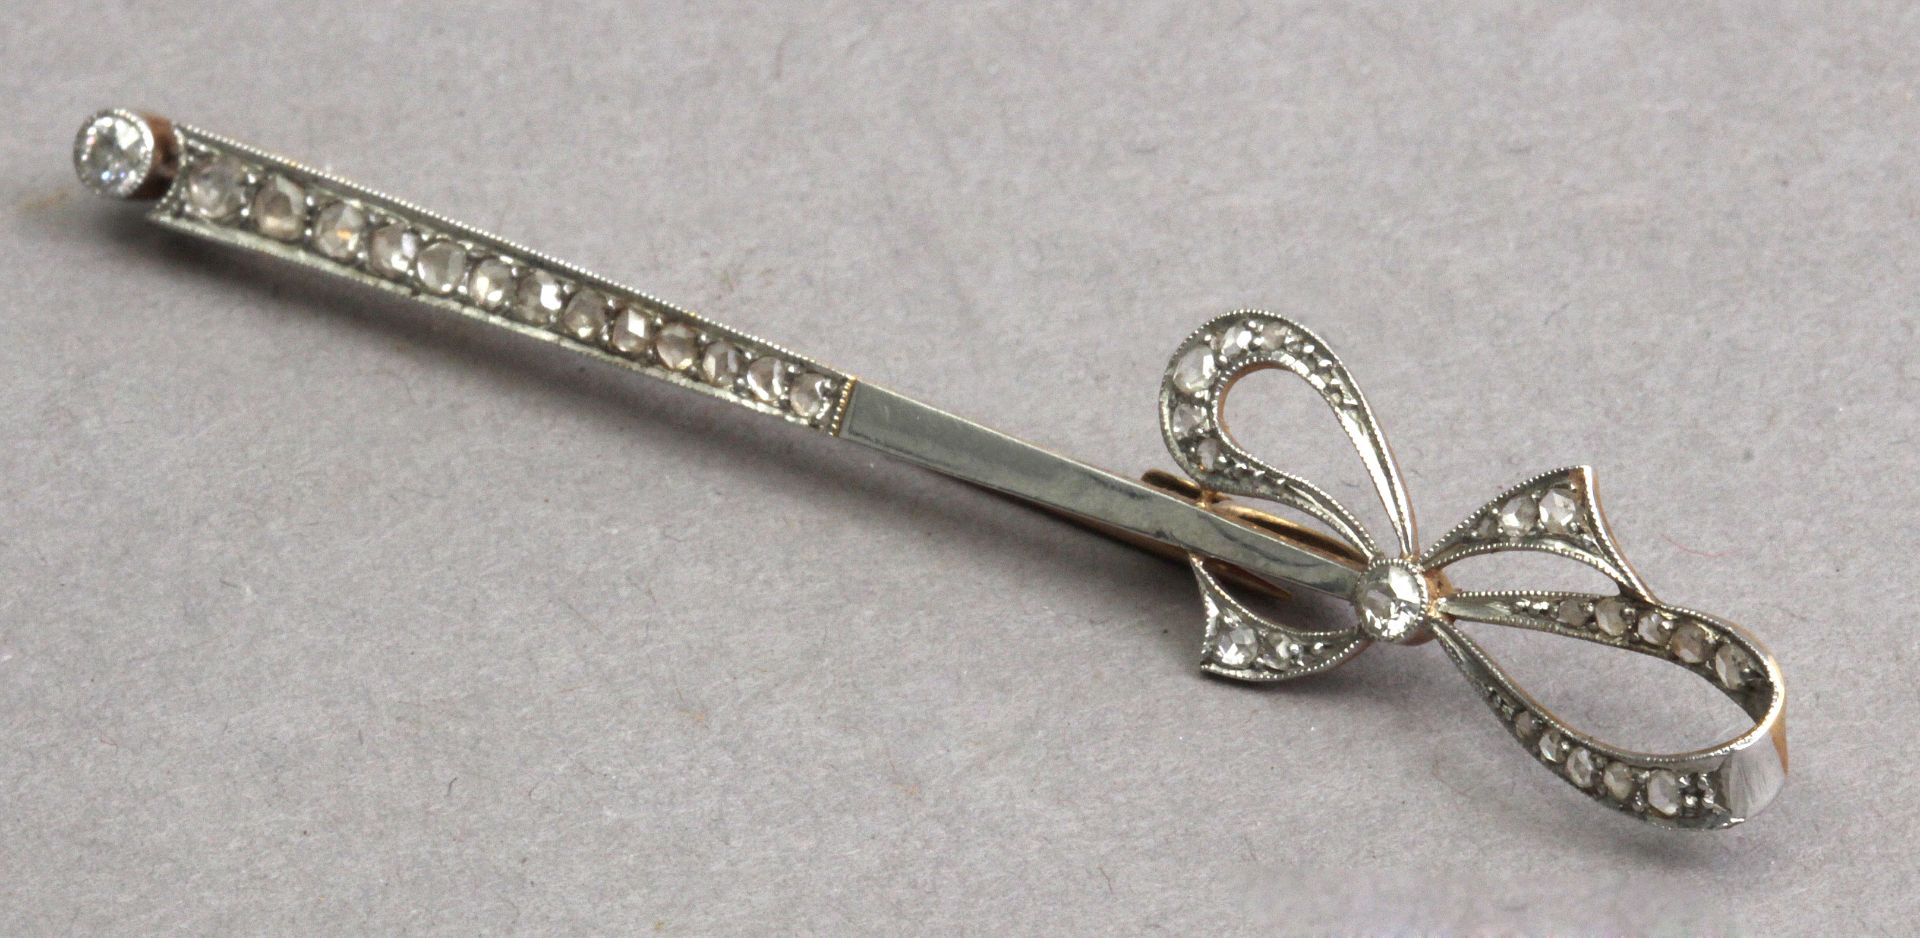 An early 20th century Belle Époque diamond tie pin with an 18 k. yellow gold and platinum setting - Image 3 of 4